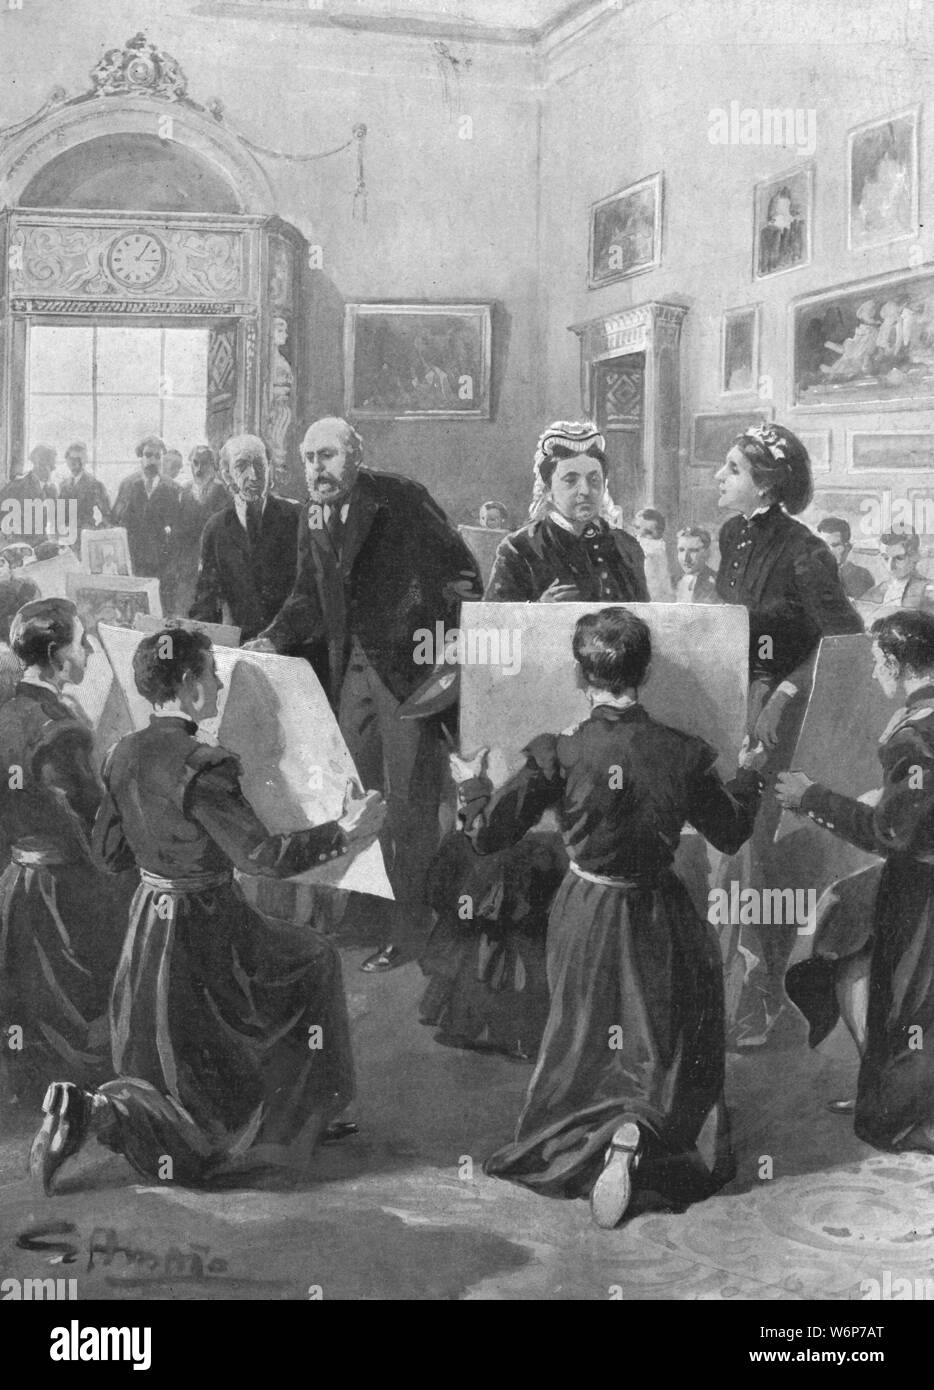 'Bluecoat Boys showing their drawings to Queen Victoria at Buckingham Palace, April 3, 1873', (1901). Queen Victoria (1819-1901) with pupils of Christ's Hospital School - known as Blue-Coat Boys after their Tudor uniform of belted blue coats - at the royal residence in London. From &quot;The Illustrated London News Record of the Glorious Reign of Queen Victoria 1837-1901: The Life and Accession of King Edward VII. and the Life of Queen Alexandra&quot;. [London, 1901] Stock Photo